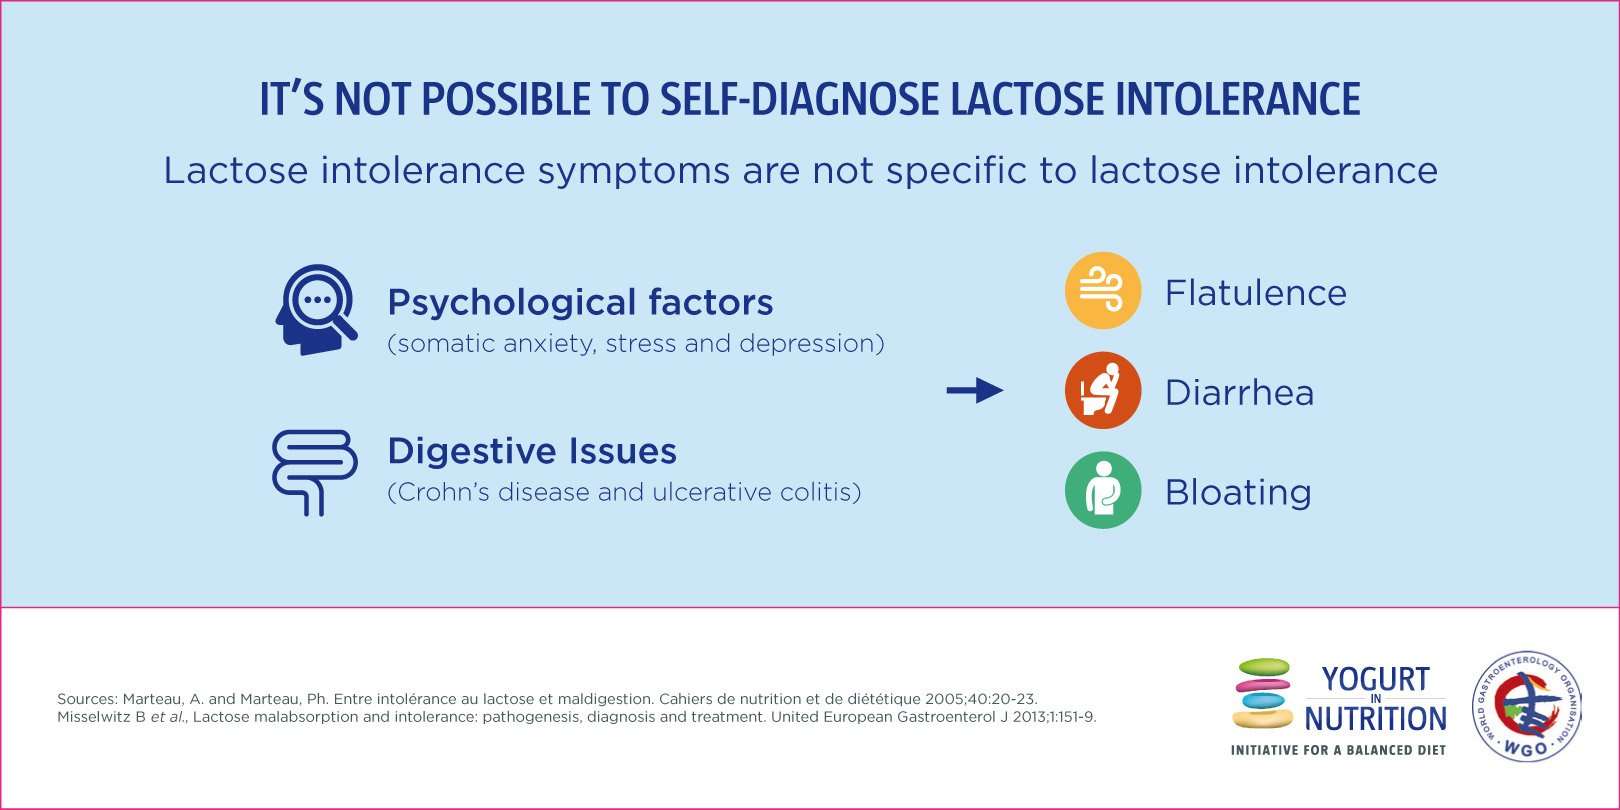 Can lactose intolerance be self